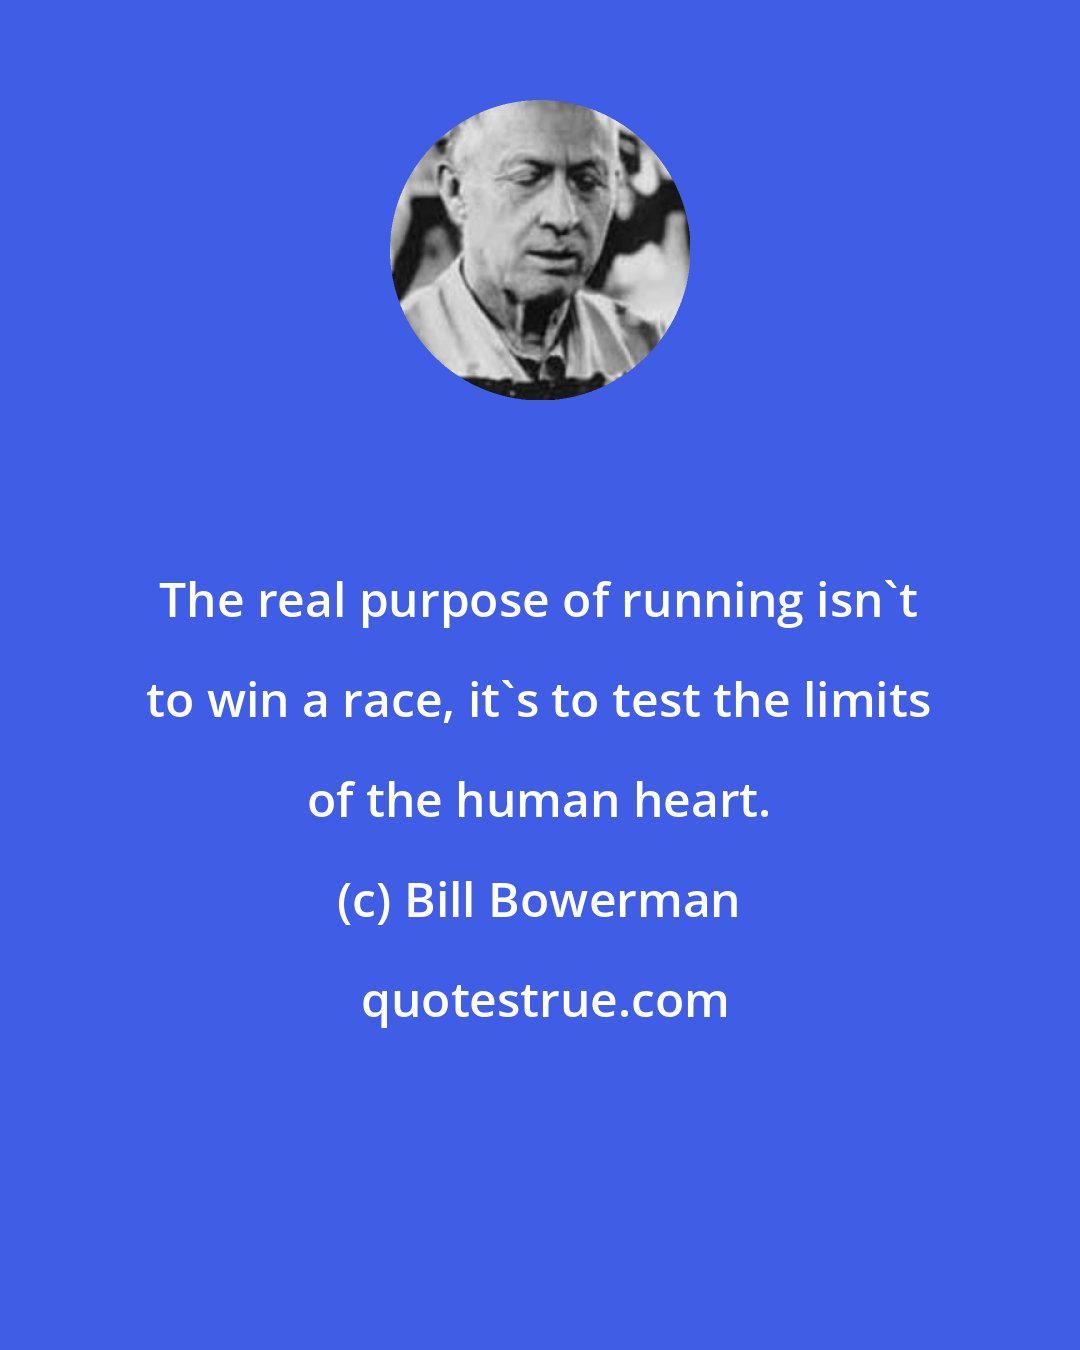 Bill Bowerman: The real purpose of running isn't to win a race, it's to test the limits of the human heart.